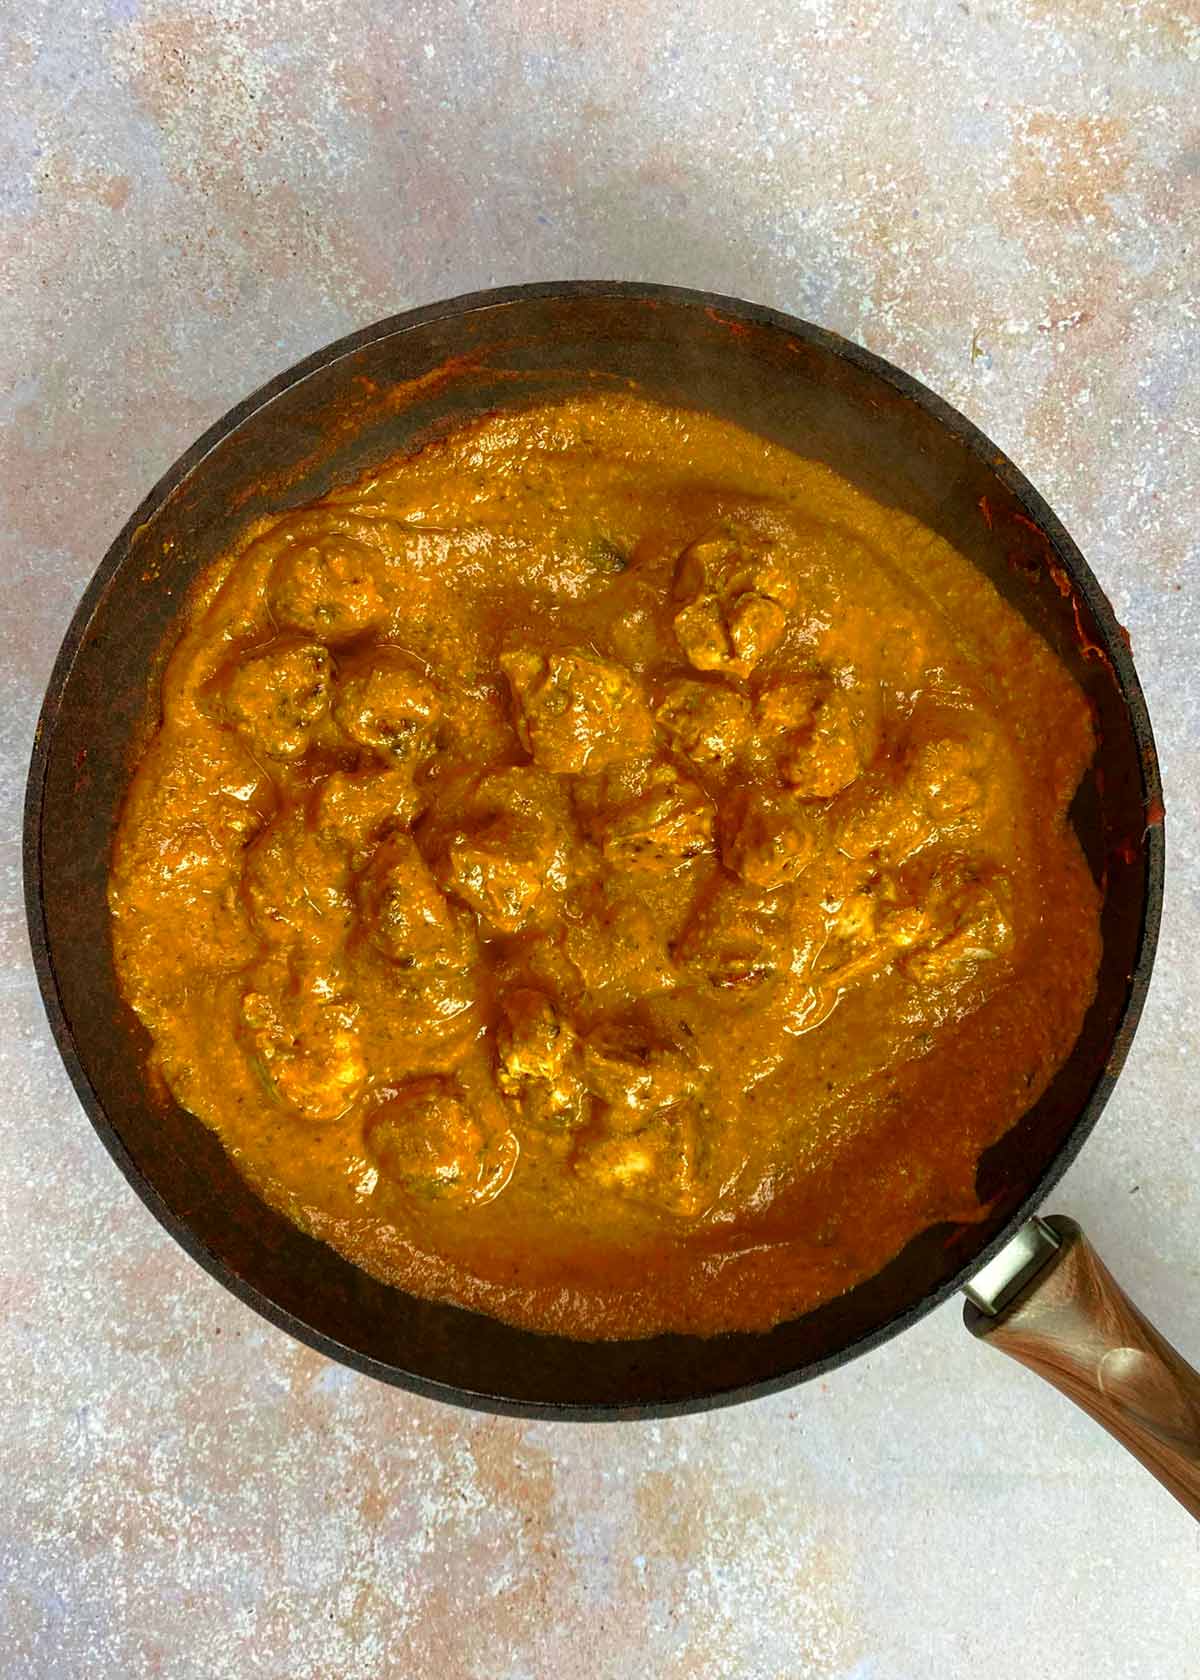 Chicken chunks added to the curry sauce.